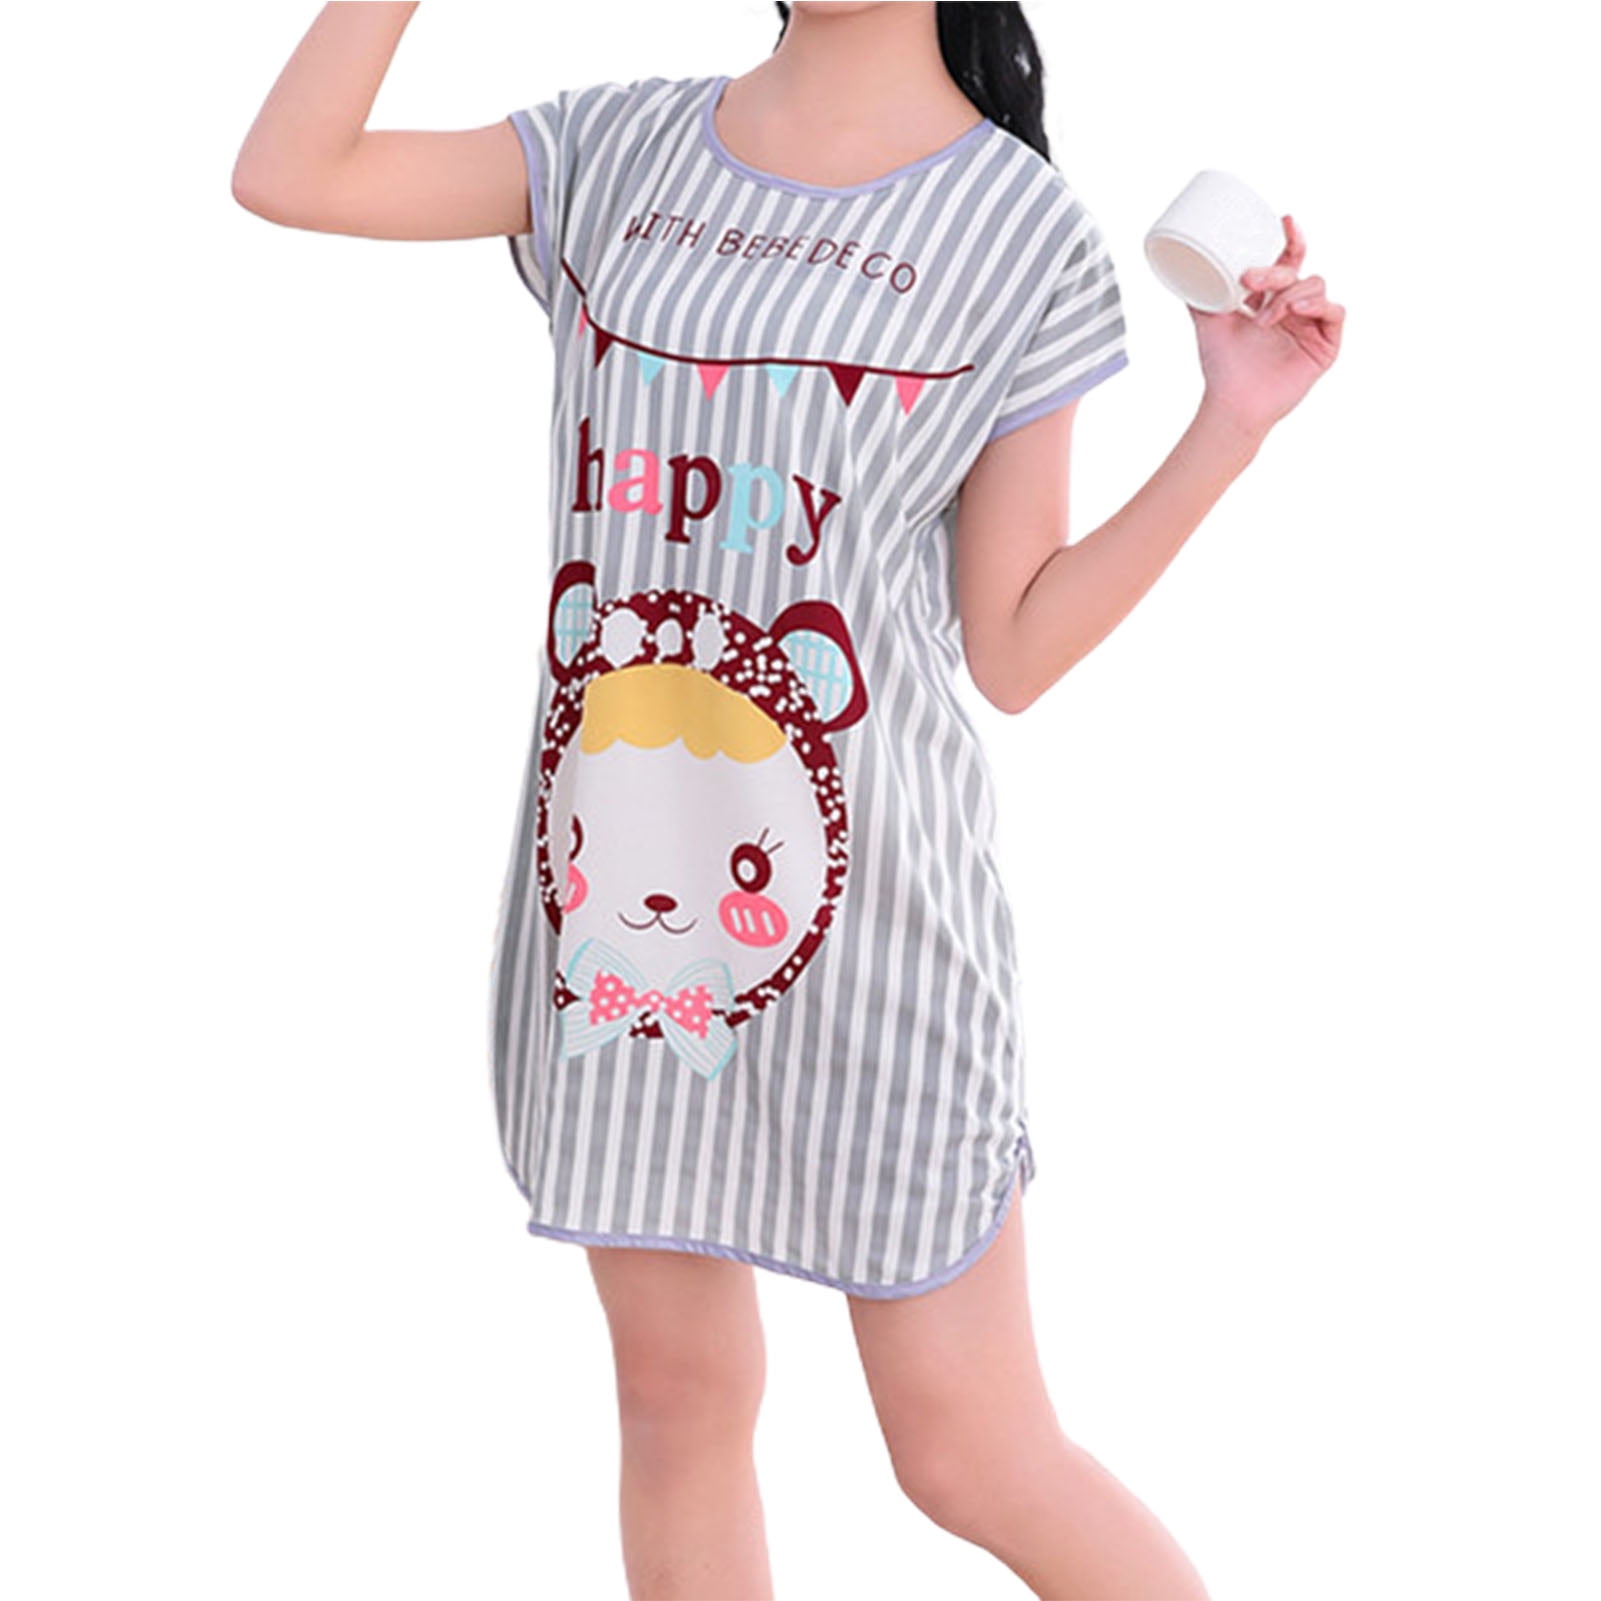 Cute Princess Nightdress Lolita Kawaii Nightgowns Sexy Lace Gauze Lingerie Sleeping  Dress Women Sleepwear Night Gown Young Girl - Price history & Review |  AliExpress Seller - Exotic Show Store | Alitools.io